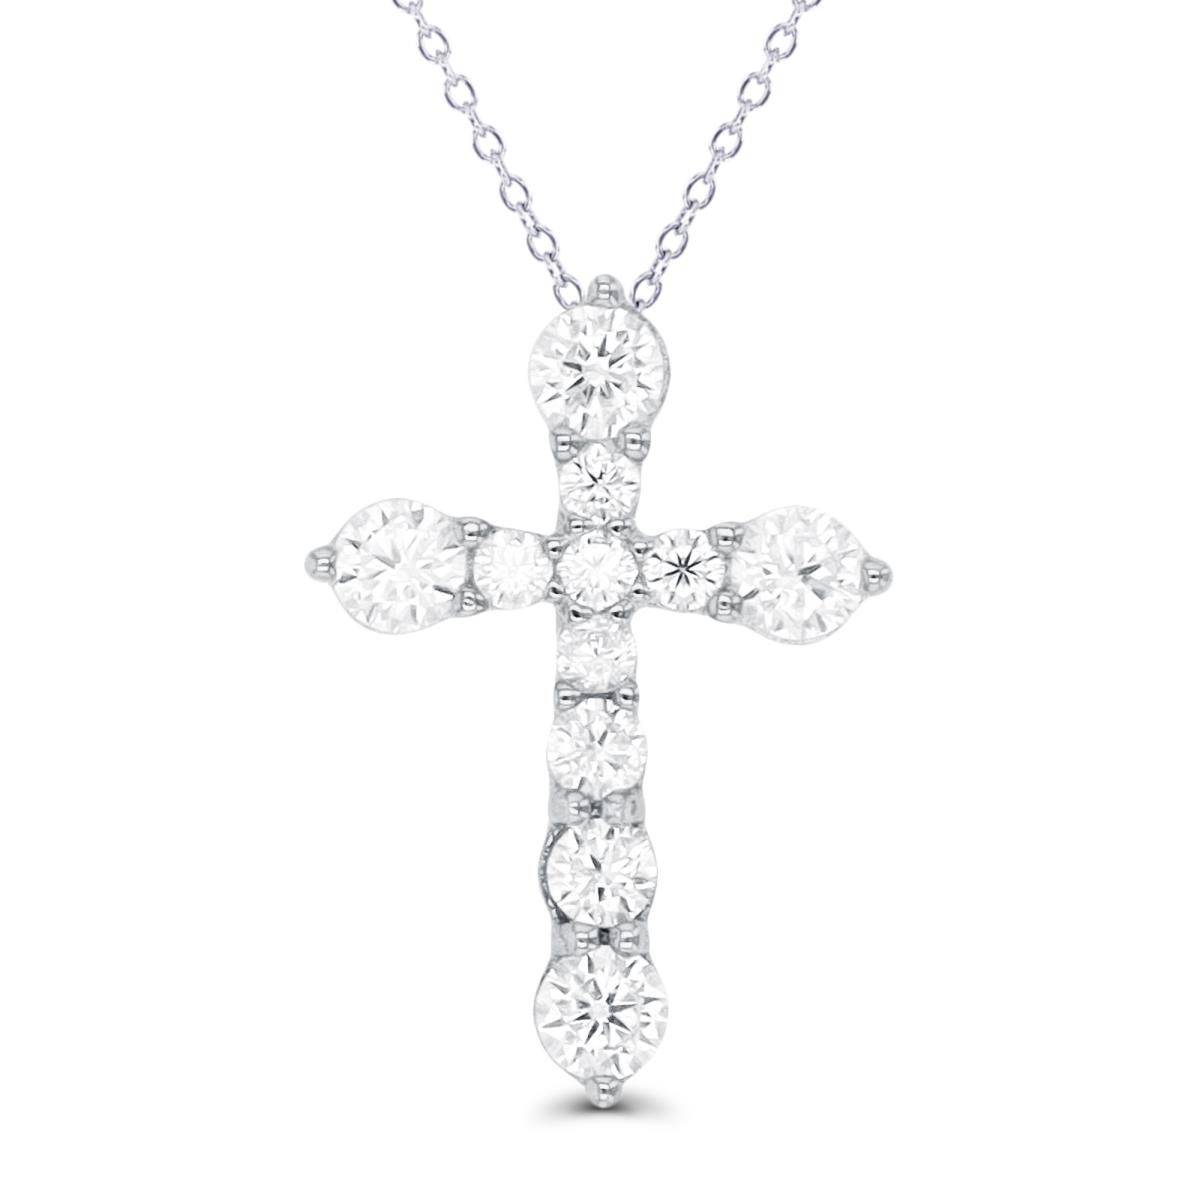 Sterling Silver Rhodium 16x11mm Paved Cross 18" Necklace